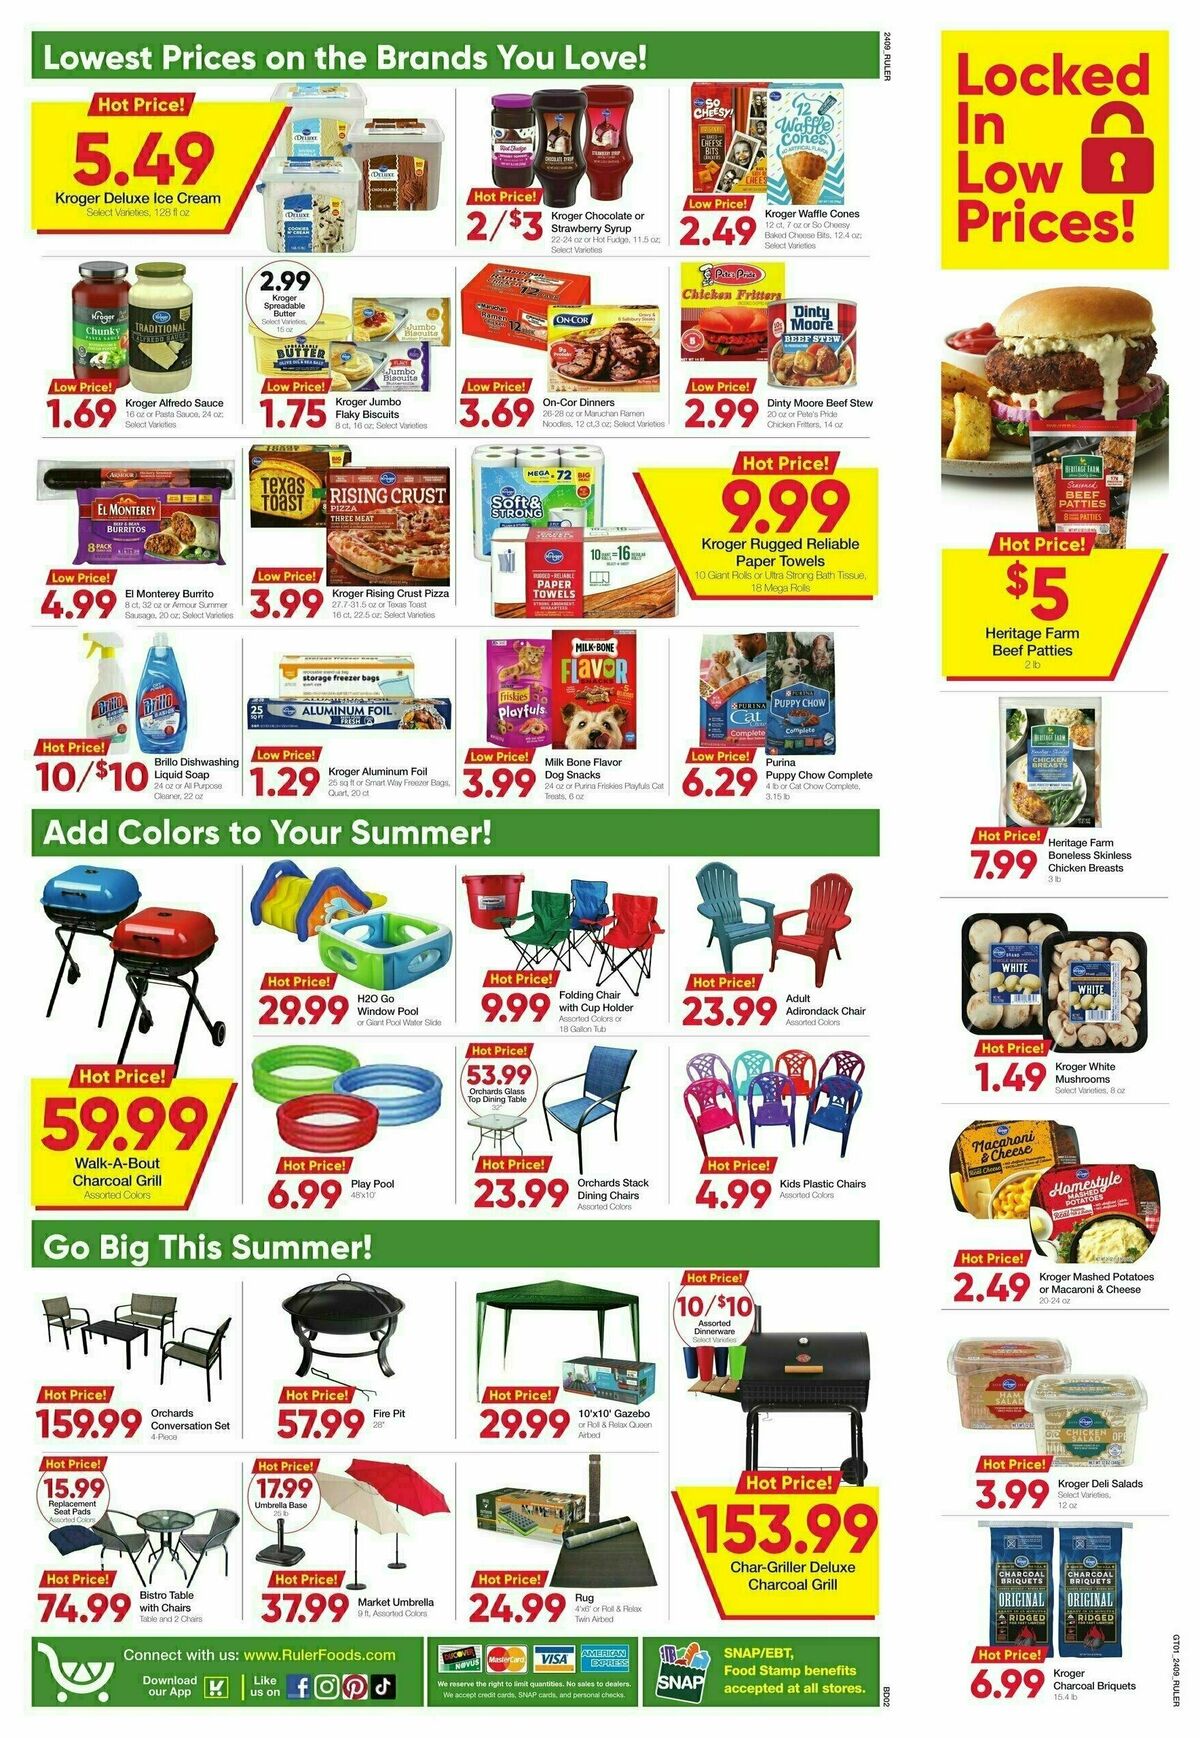 Ruler Foods Weekly Ad from April 3